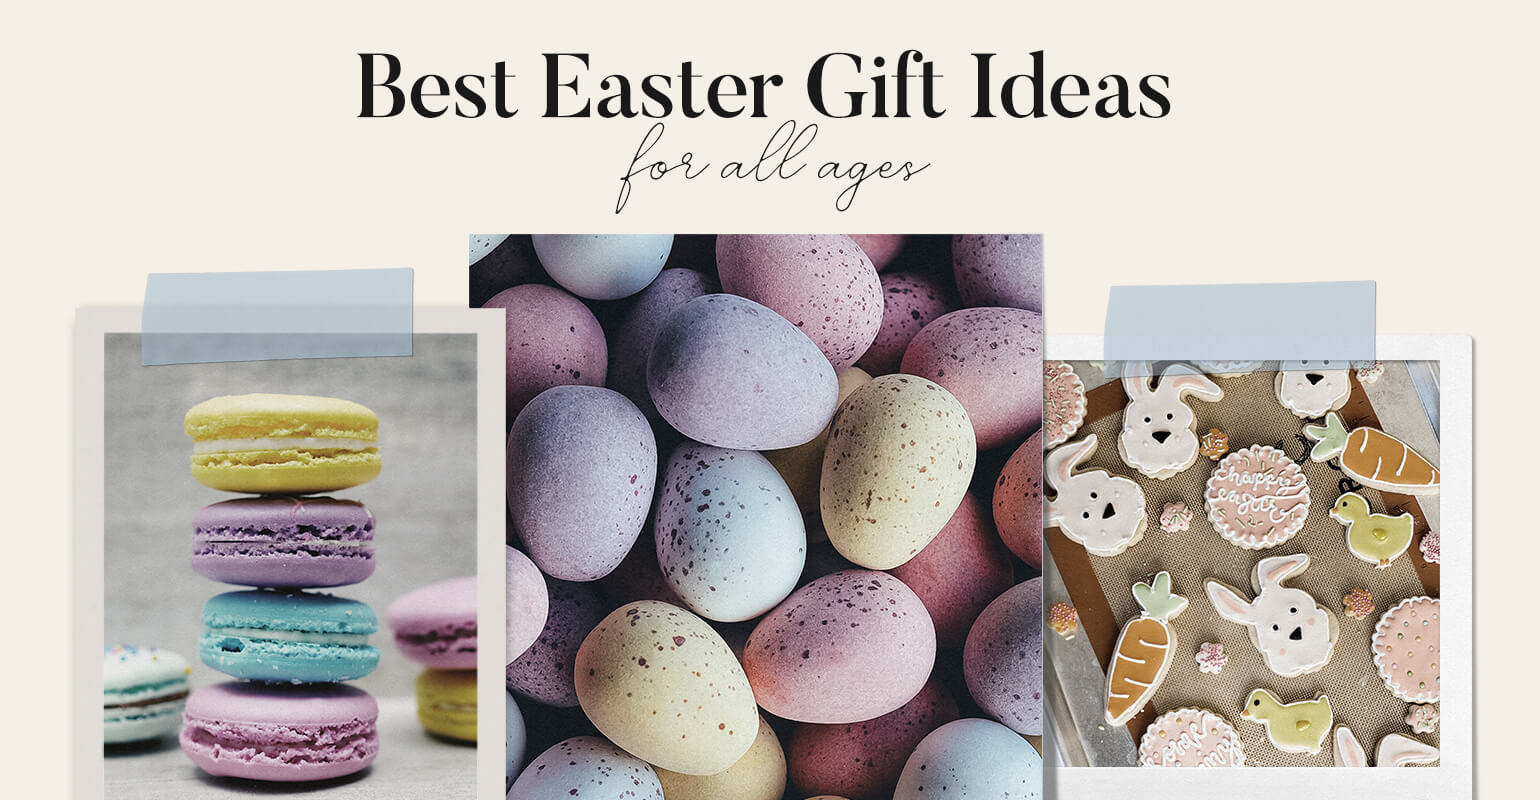 16 Best Easter Gifts for Everyone’s Basket Guide